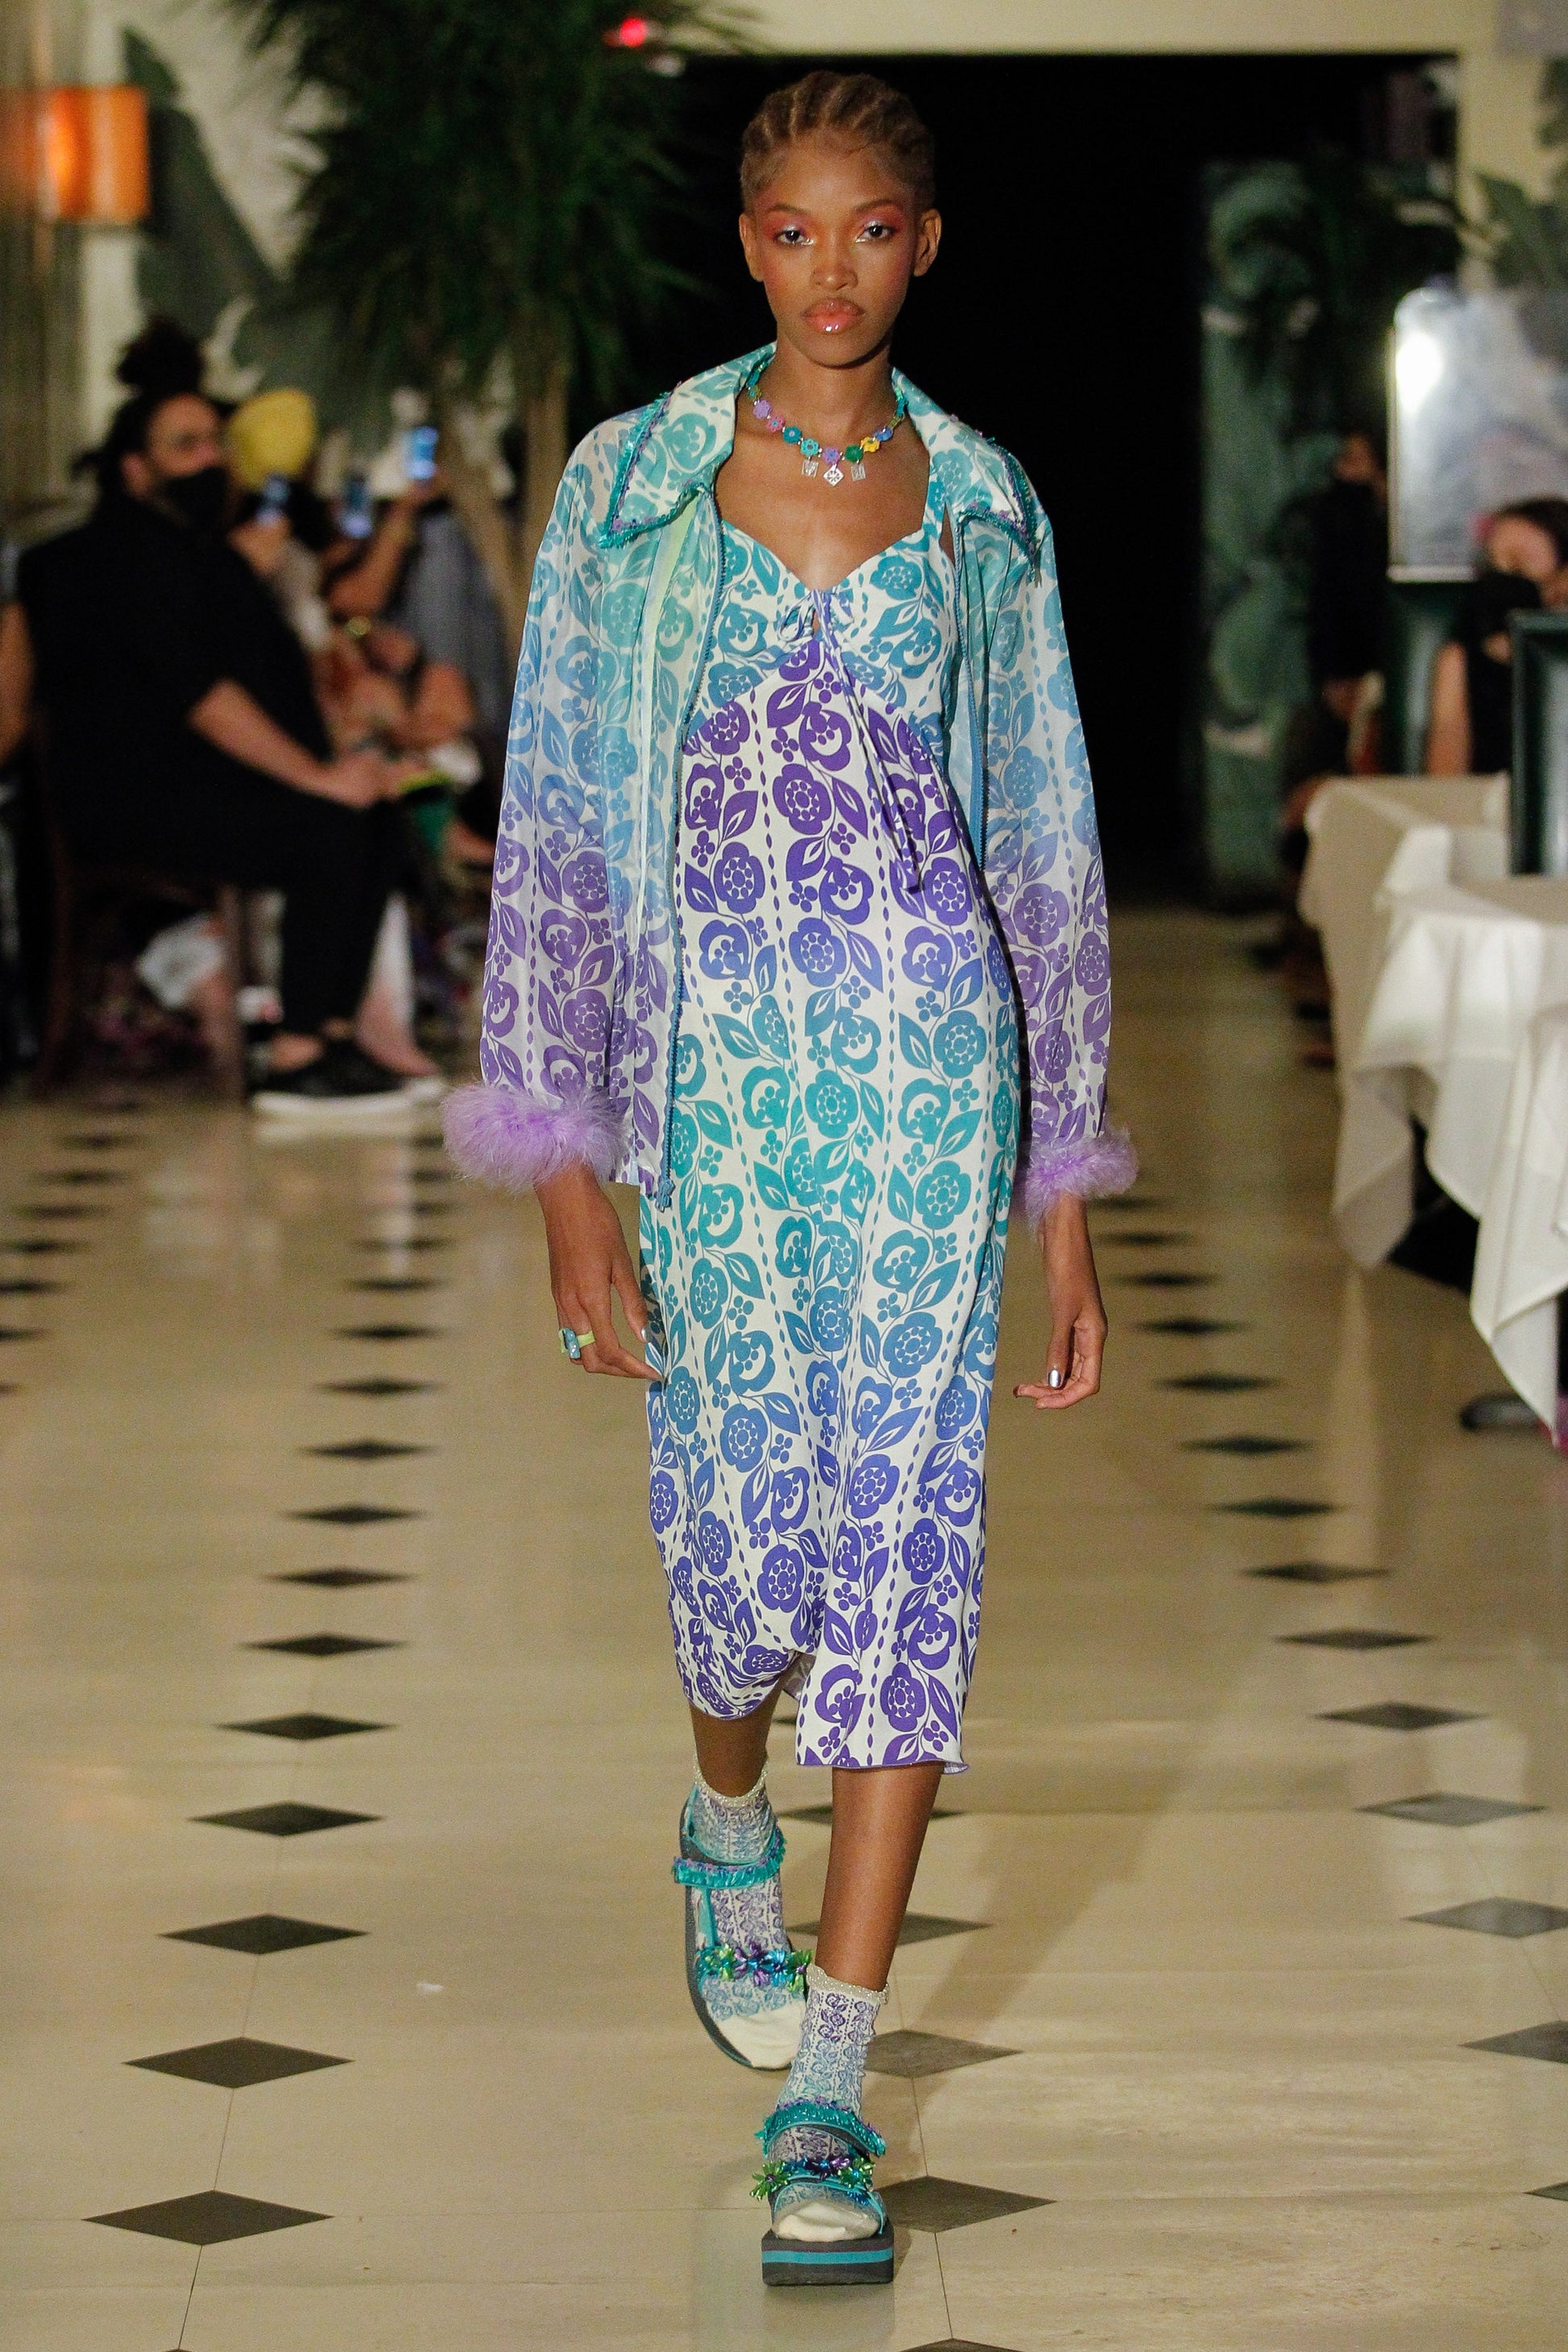 Dress under the runway lights, 2 shade of blue, bright light in middle and darker top and bottom